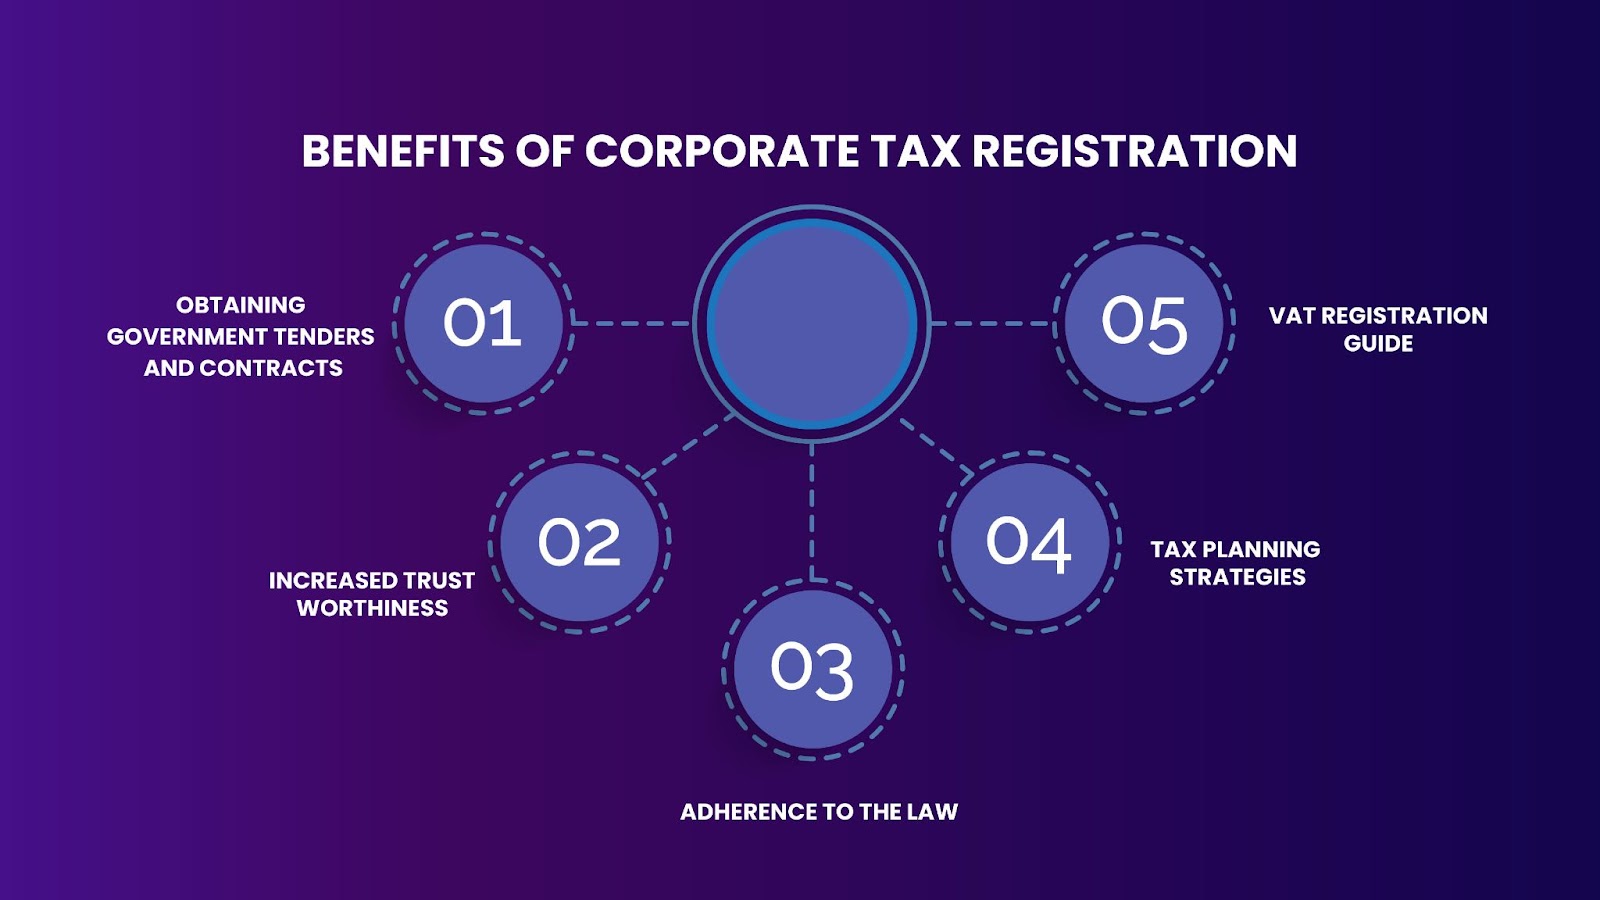 Benefits of Corporate Tax Registration